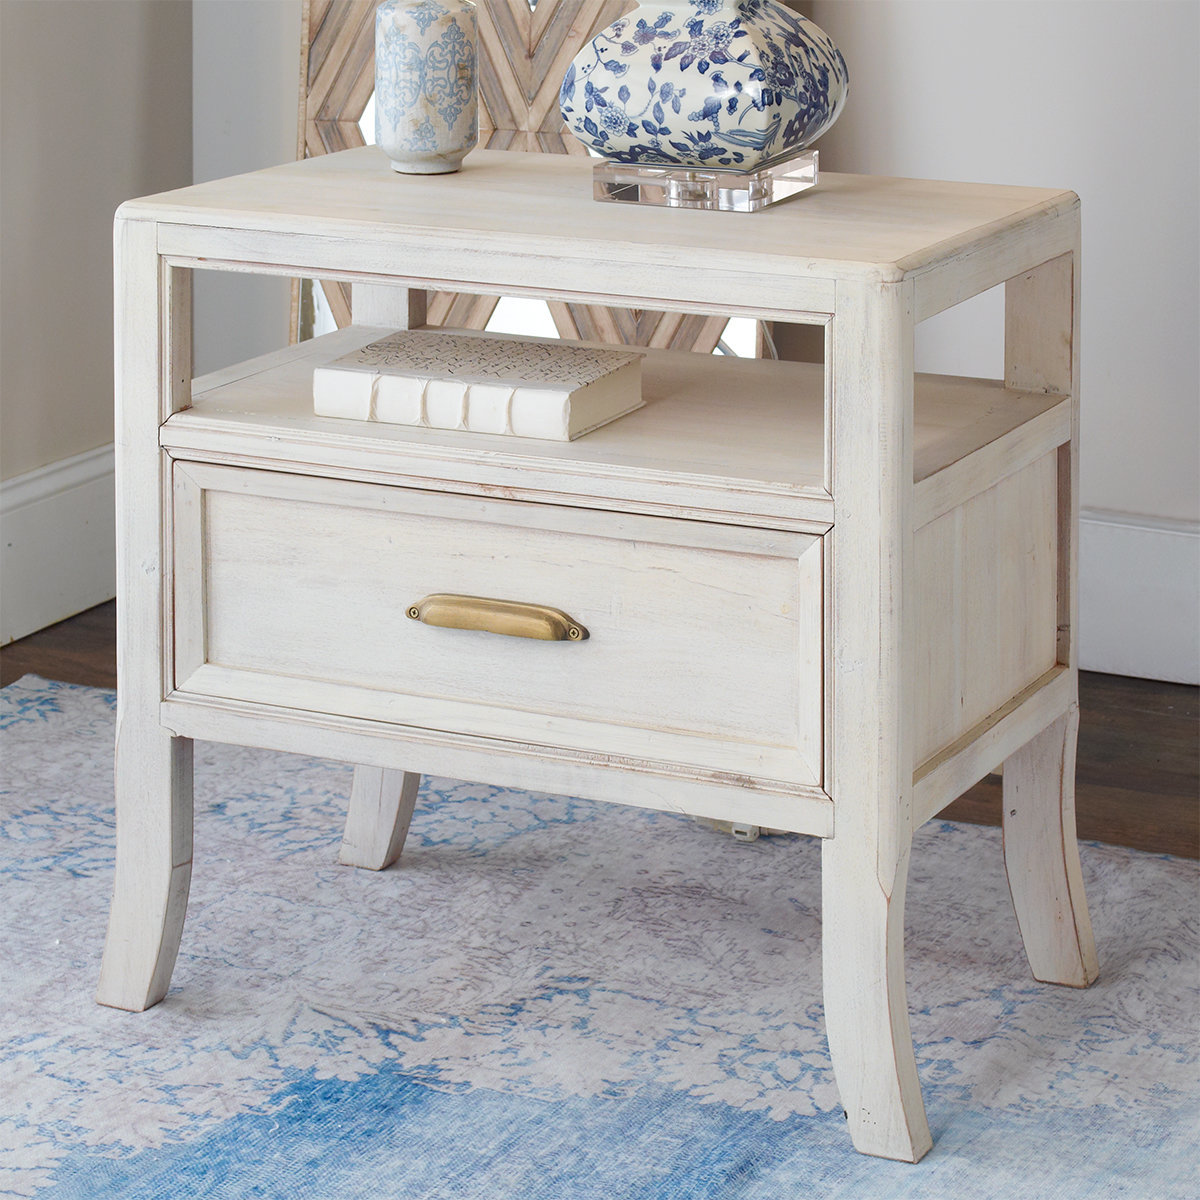 lorraine wood end table shades light fretwork accent blue acacia whitewash murphy desk small coffee legs canadian tire butler pier imports chairs dale tiffany glass wall art